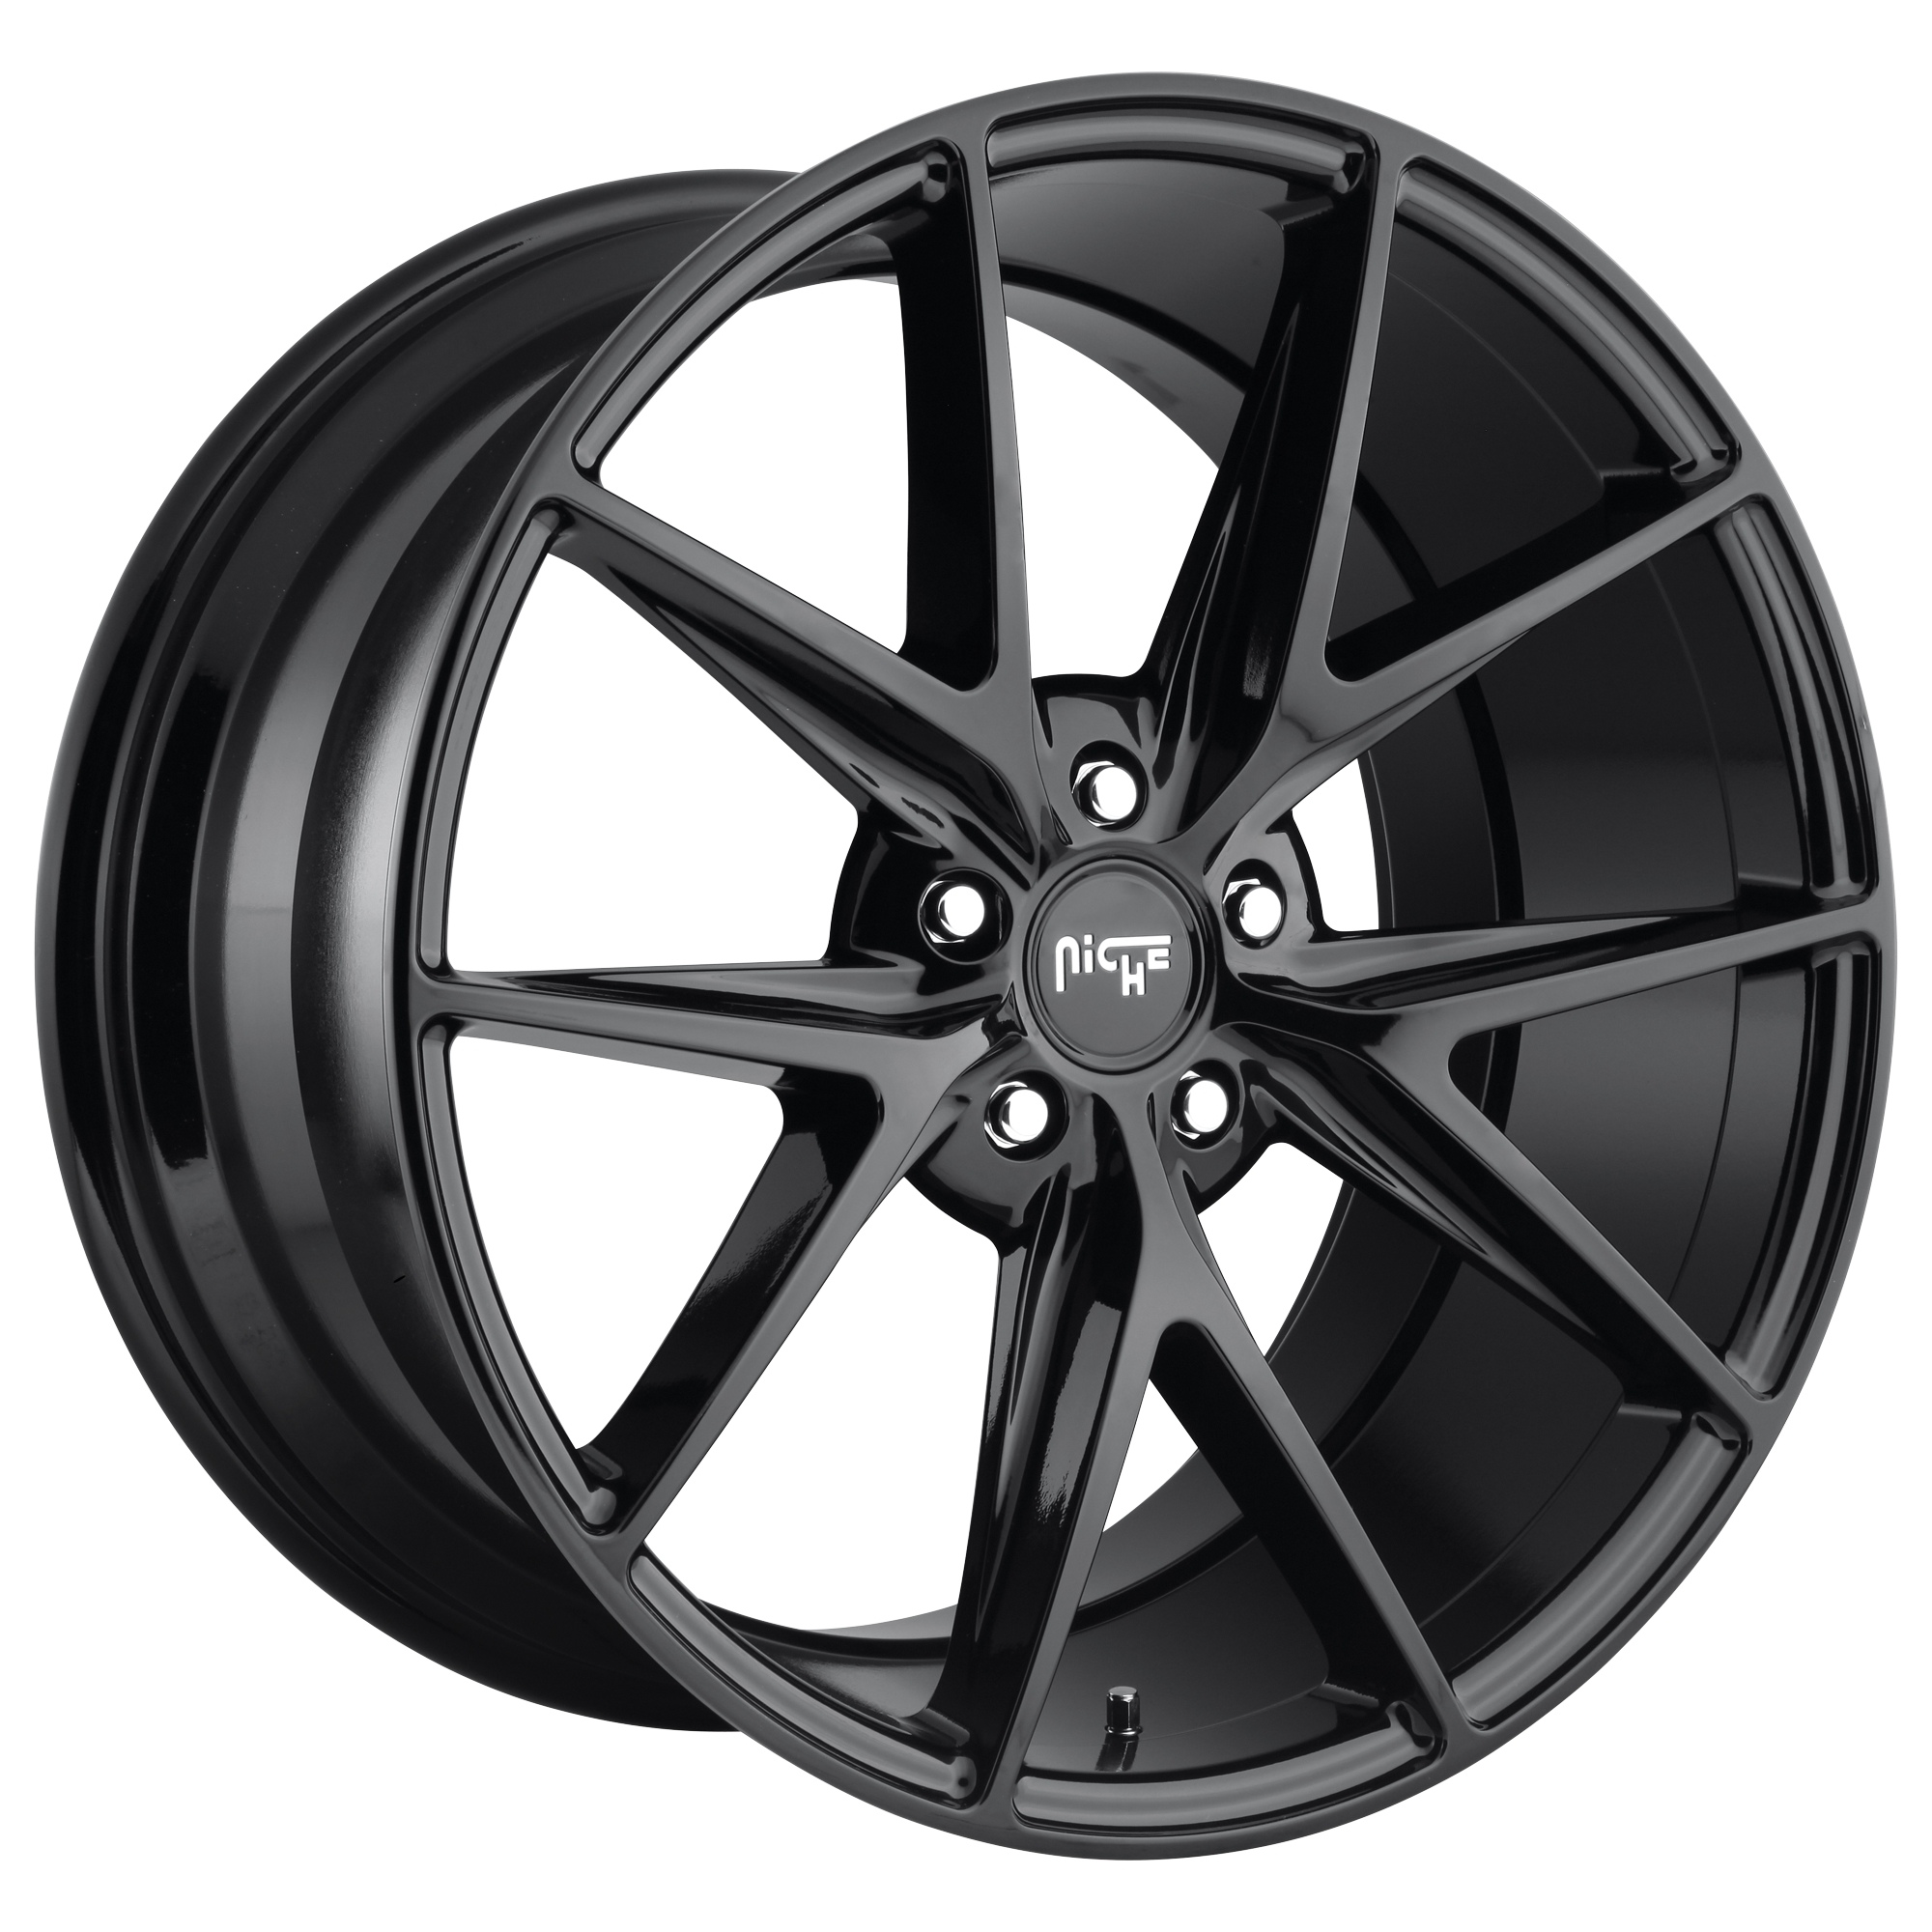 M119 MISANO   WHEELS AND RIMS PACKAGES